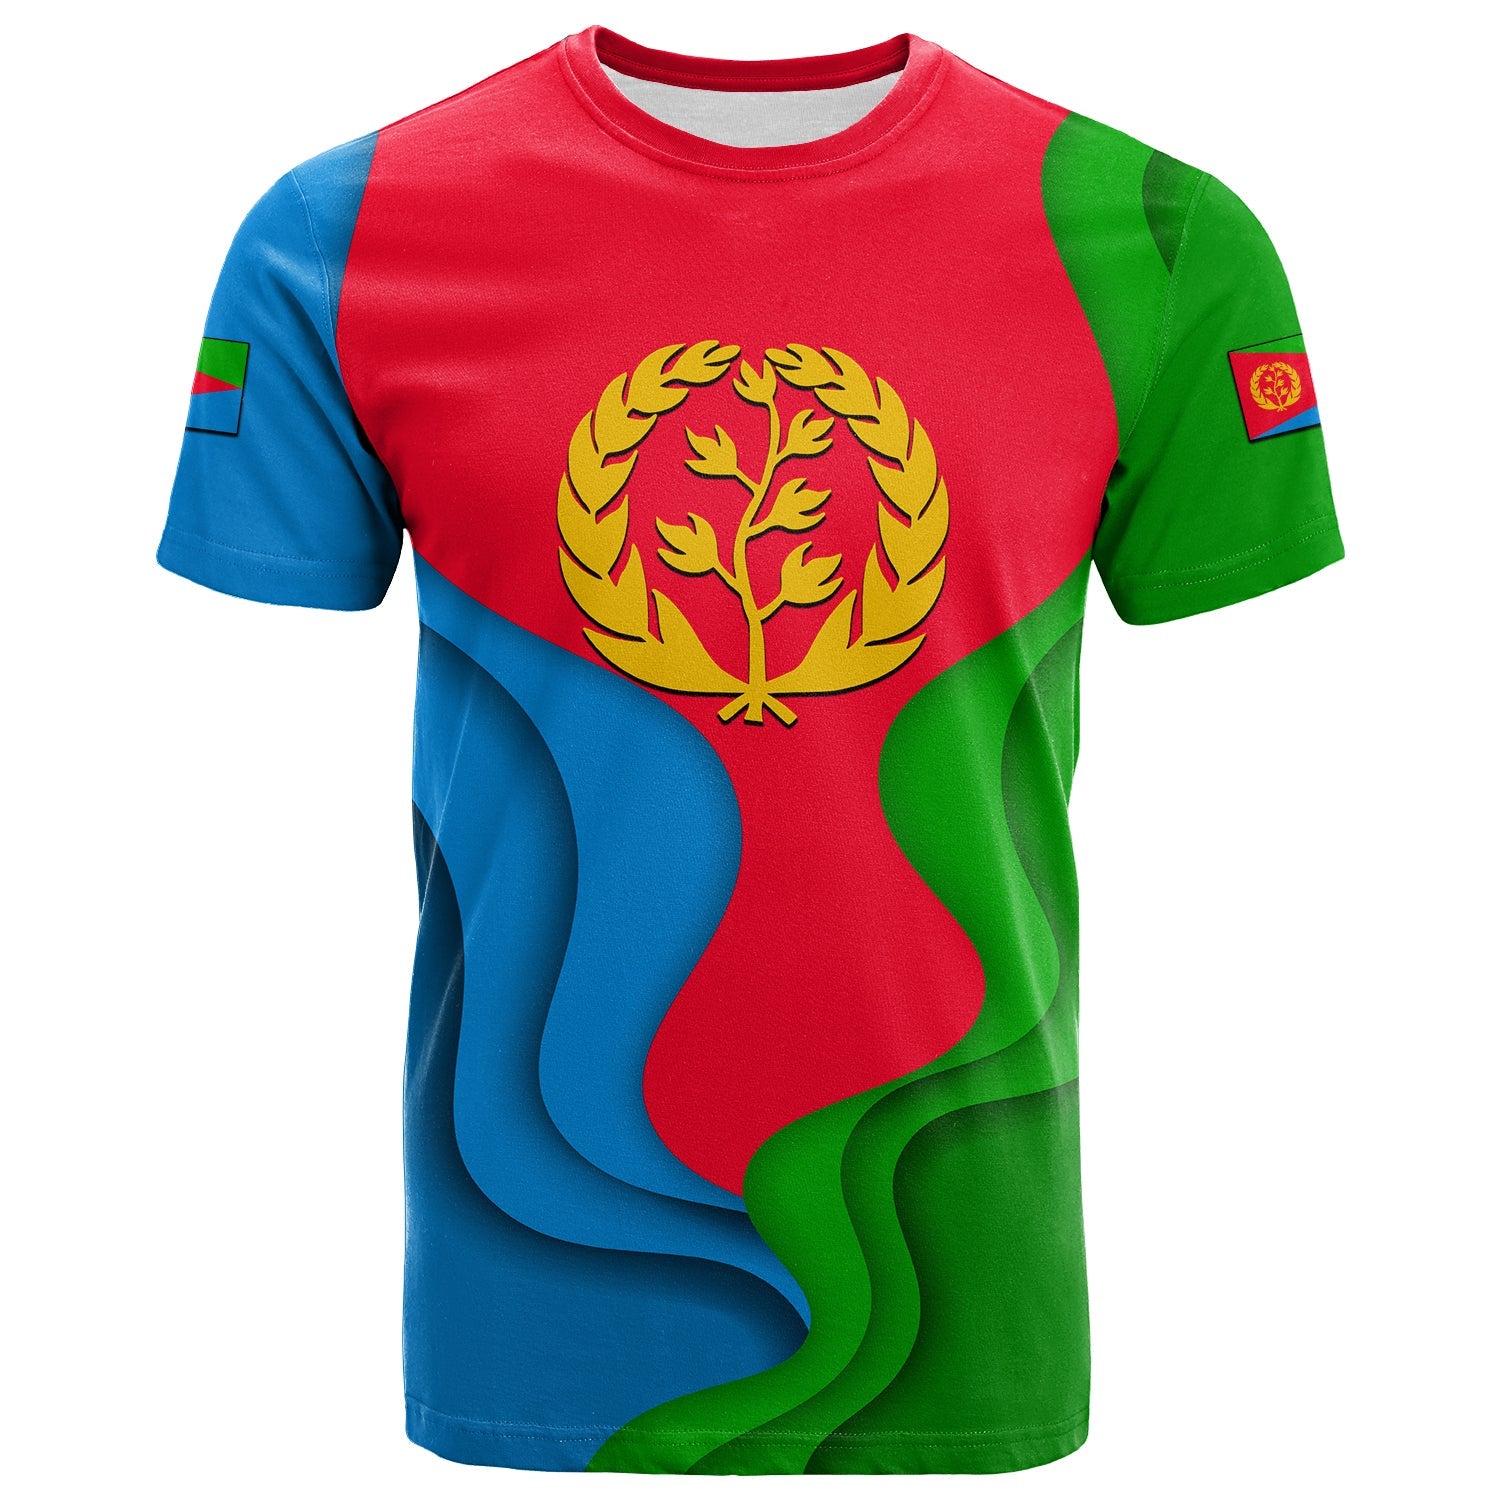 eritrea-independence-day-t-shirt-2022-style-no3